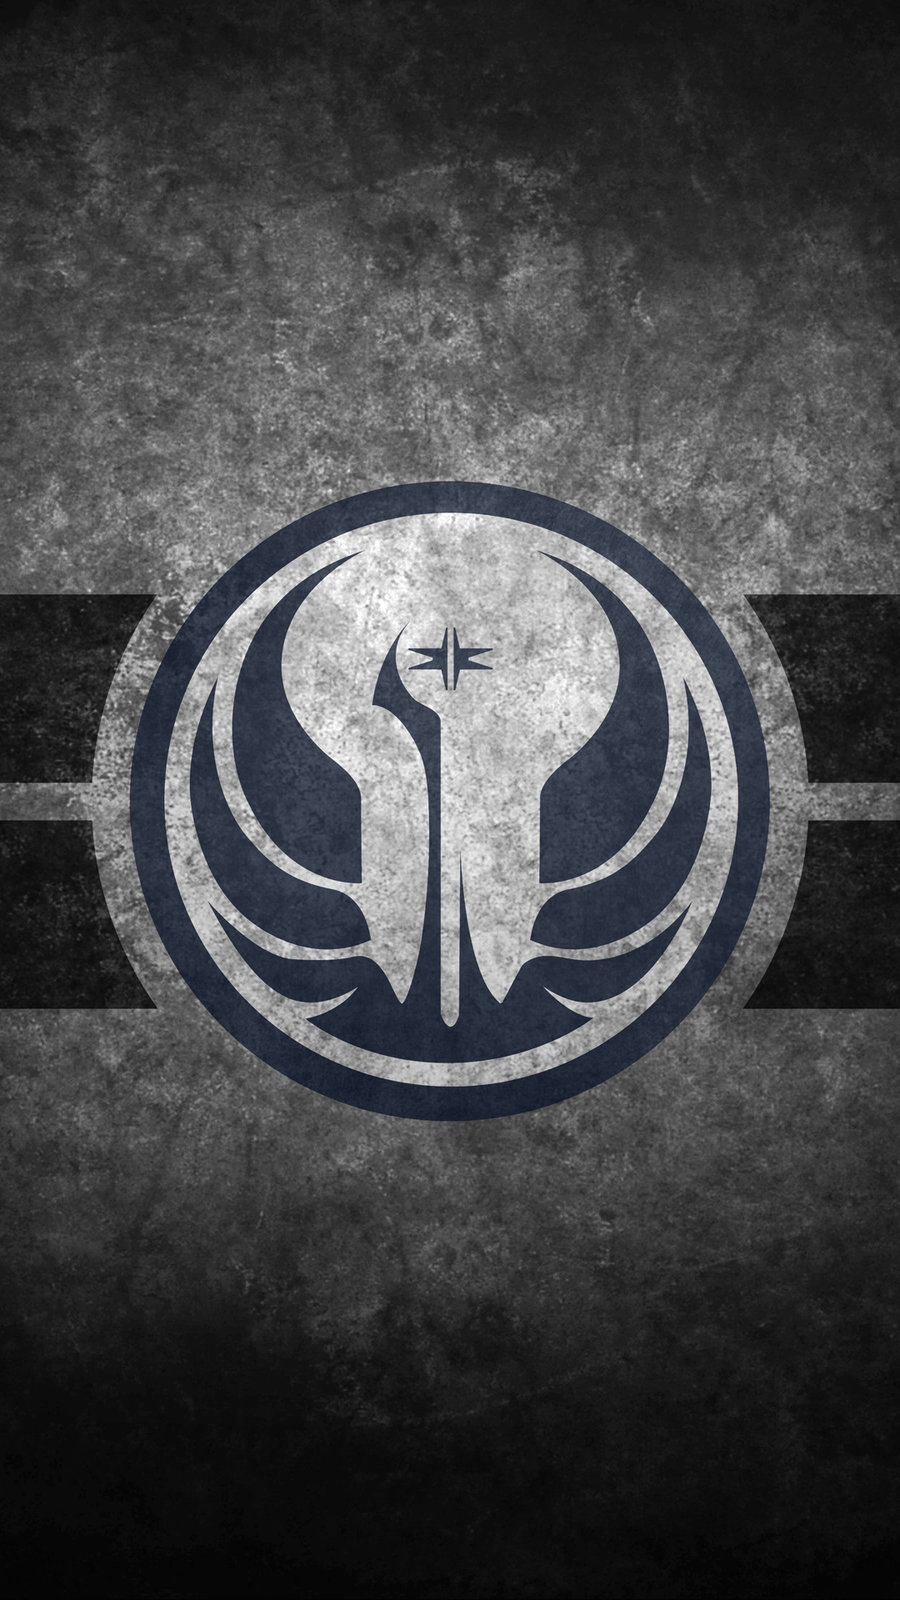 Star Wars Old Republic Symbol Cellphone Wallpaper By Swmand4 On